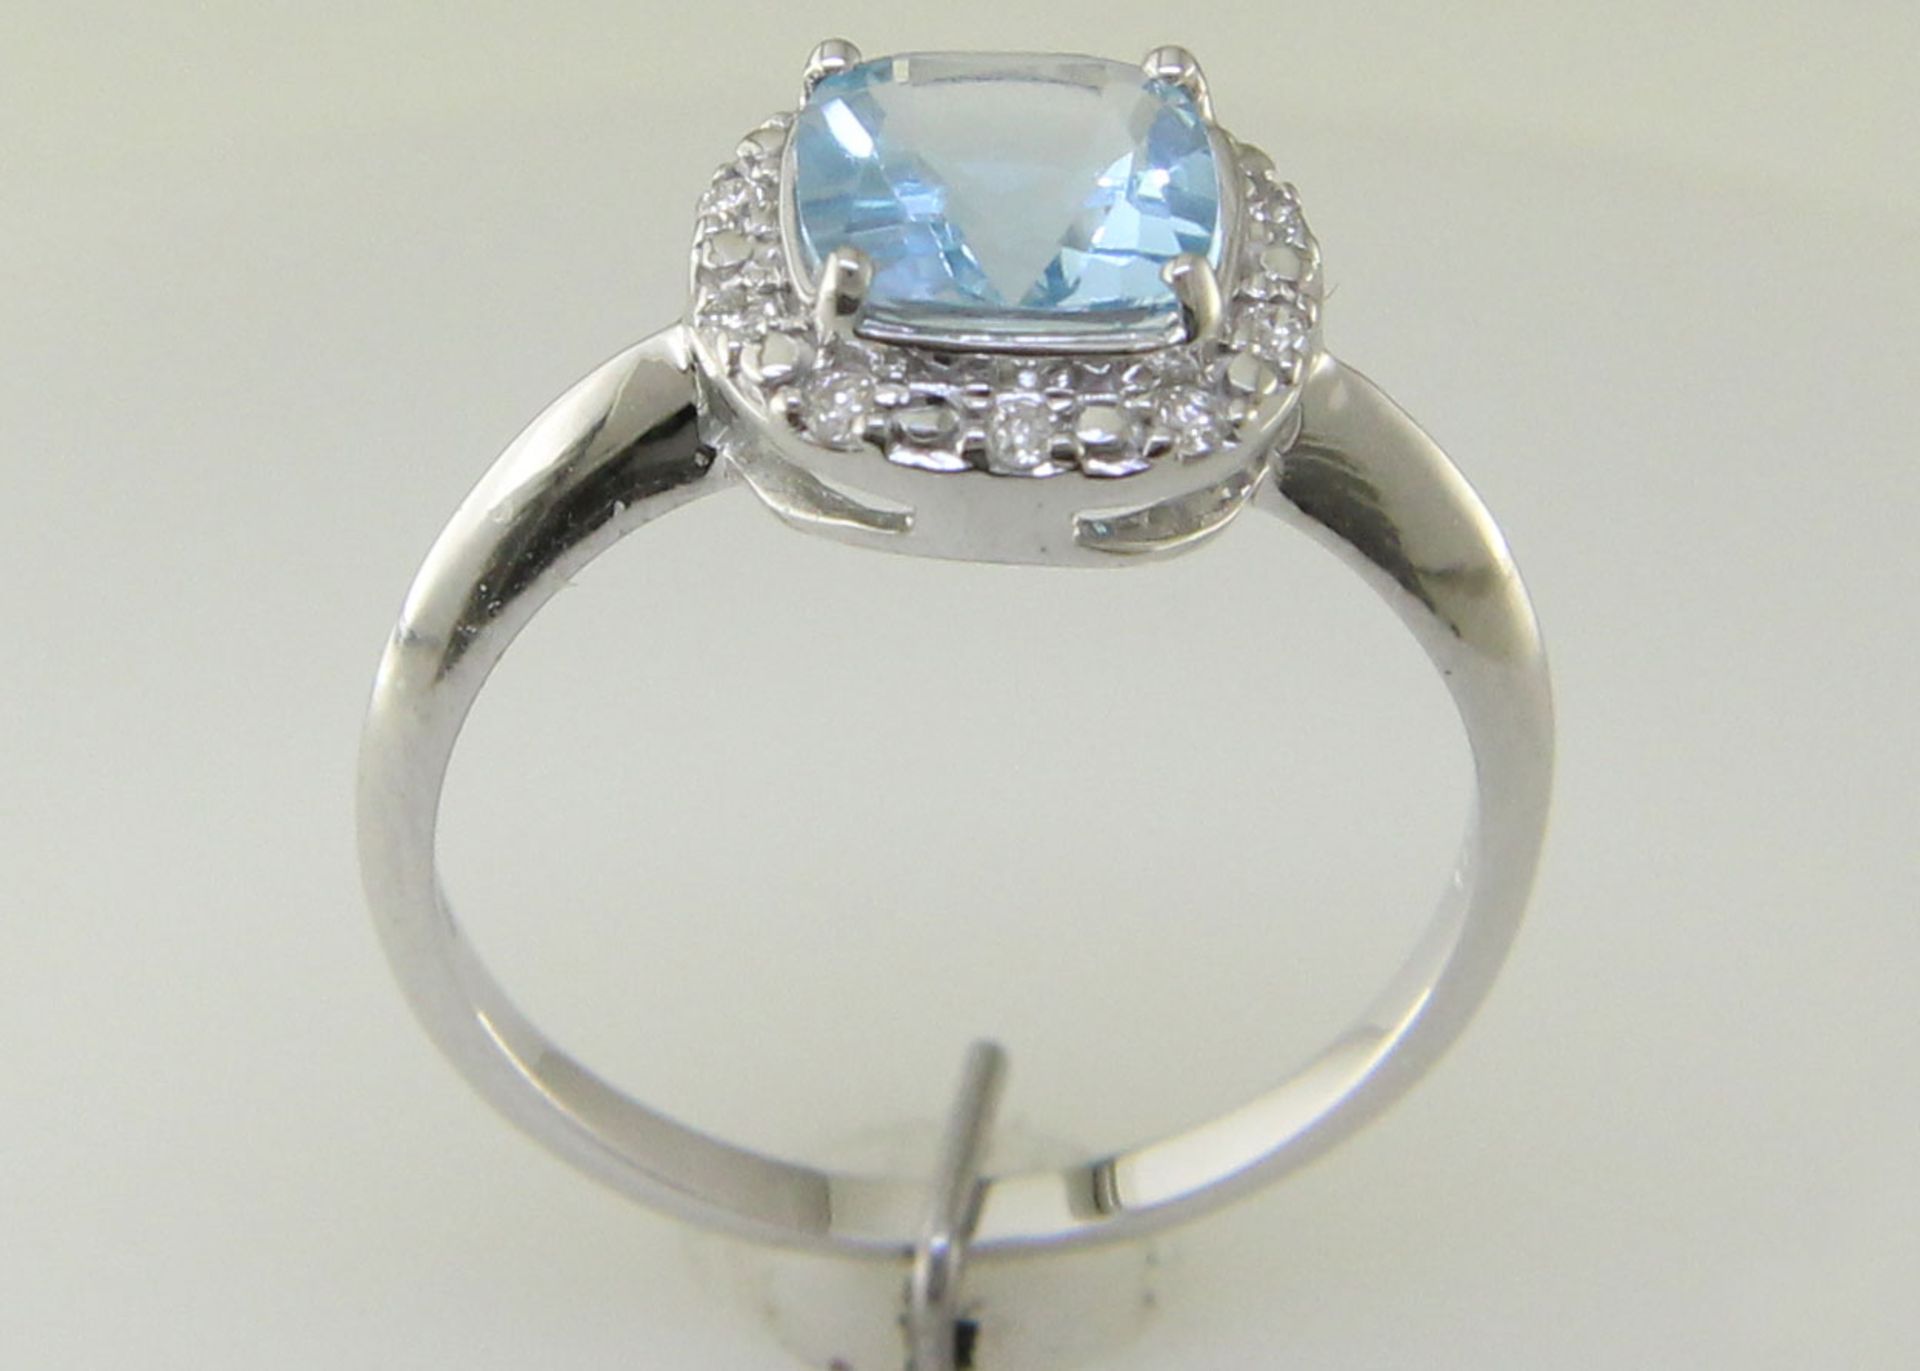 9ct White Gold Diamond And Blue Topaz Ring (BT1.79) 0.10 Carats - Valued By GIE £1,920.00 - A - Image 5 of 10